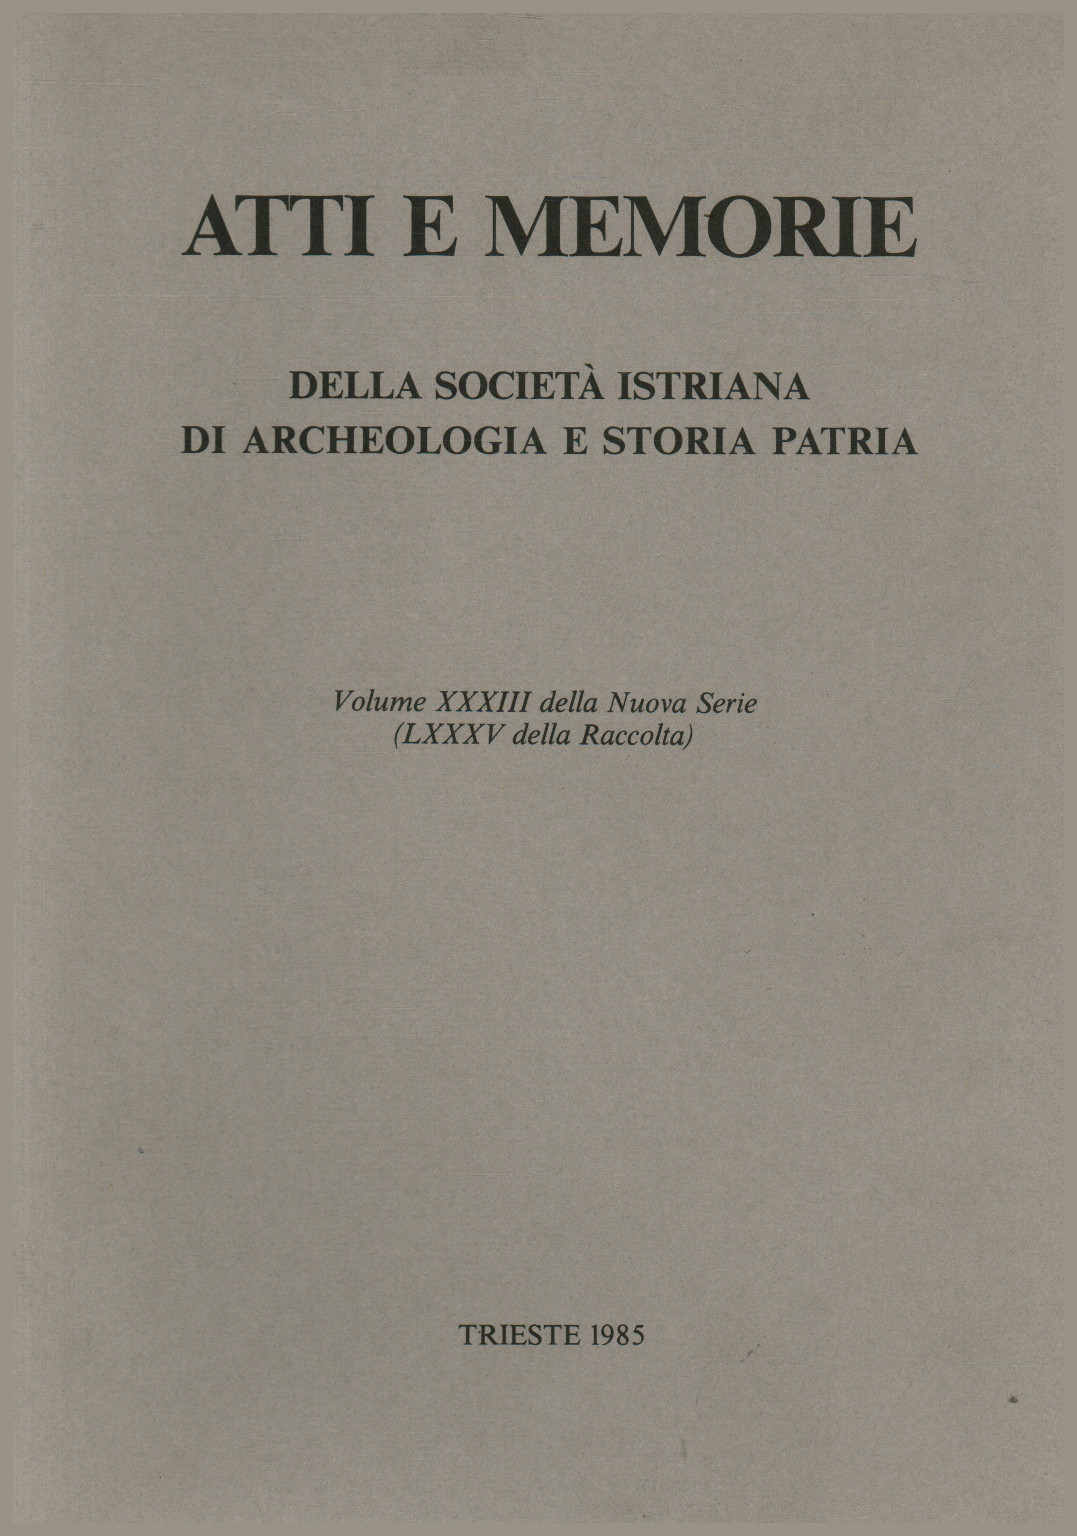 Acts and Memoirs of the Istrian society of archeolo, s.a.